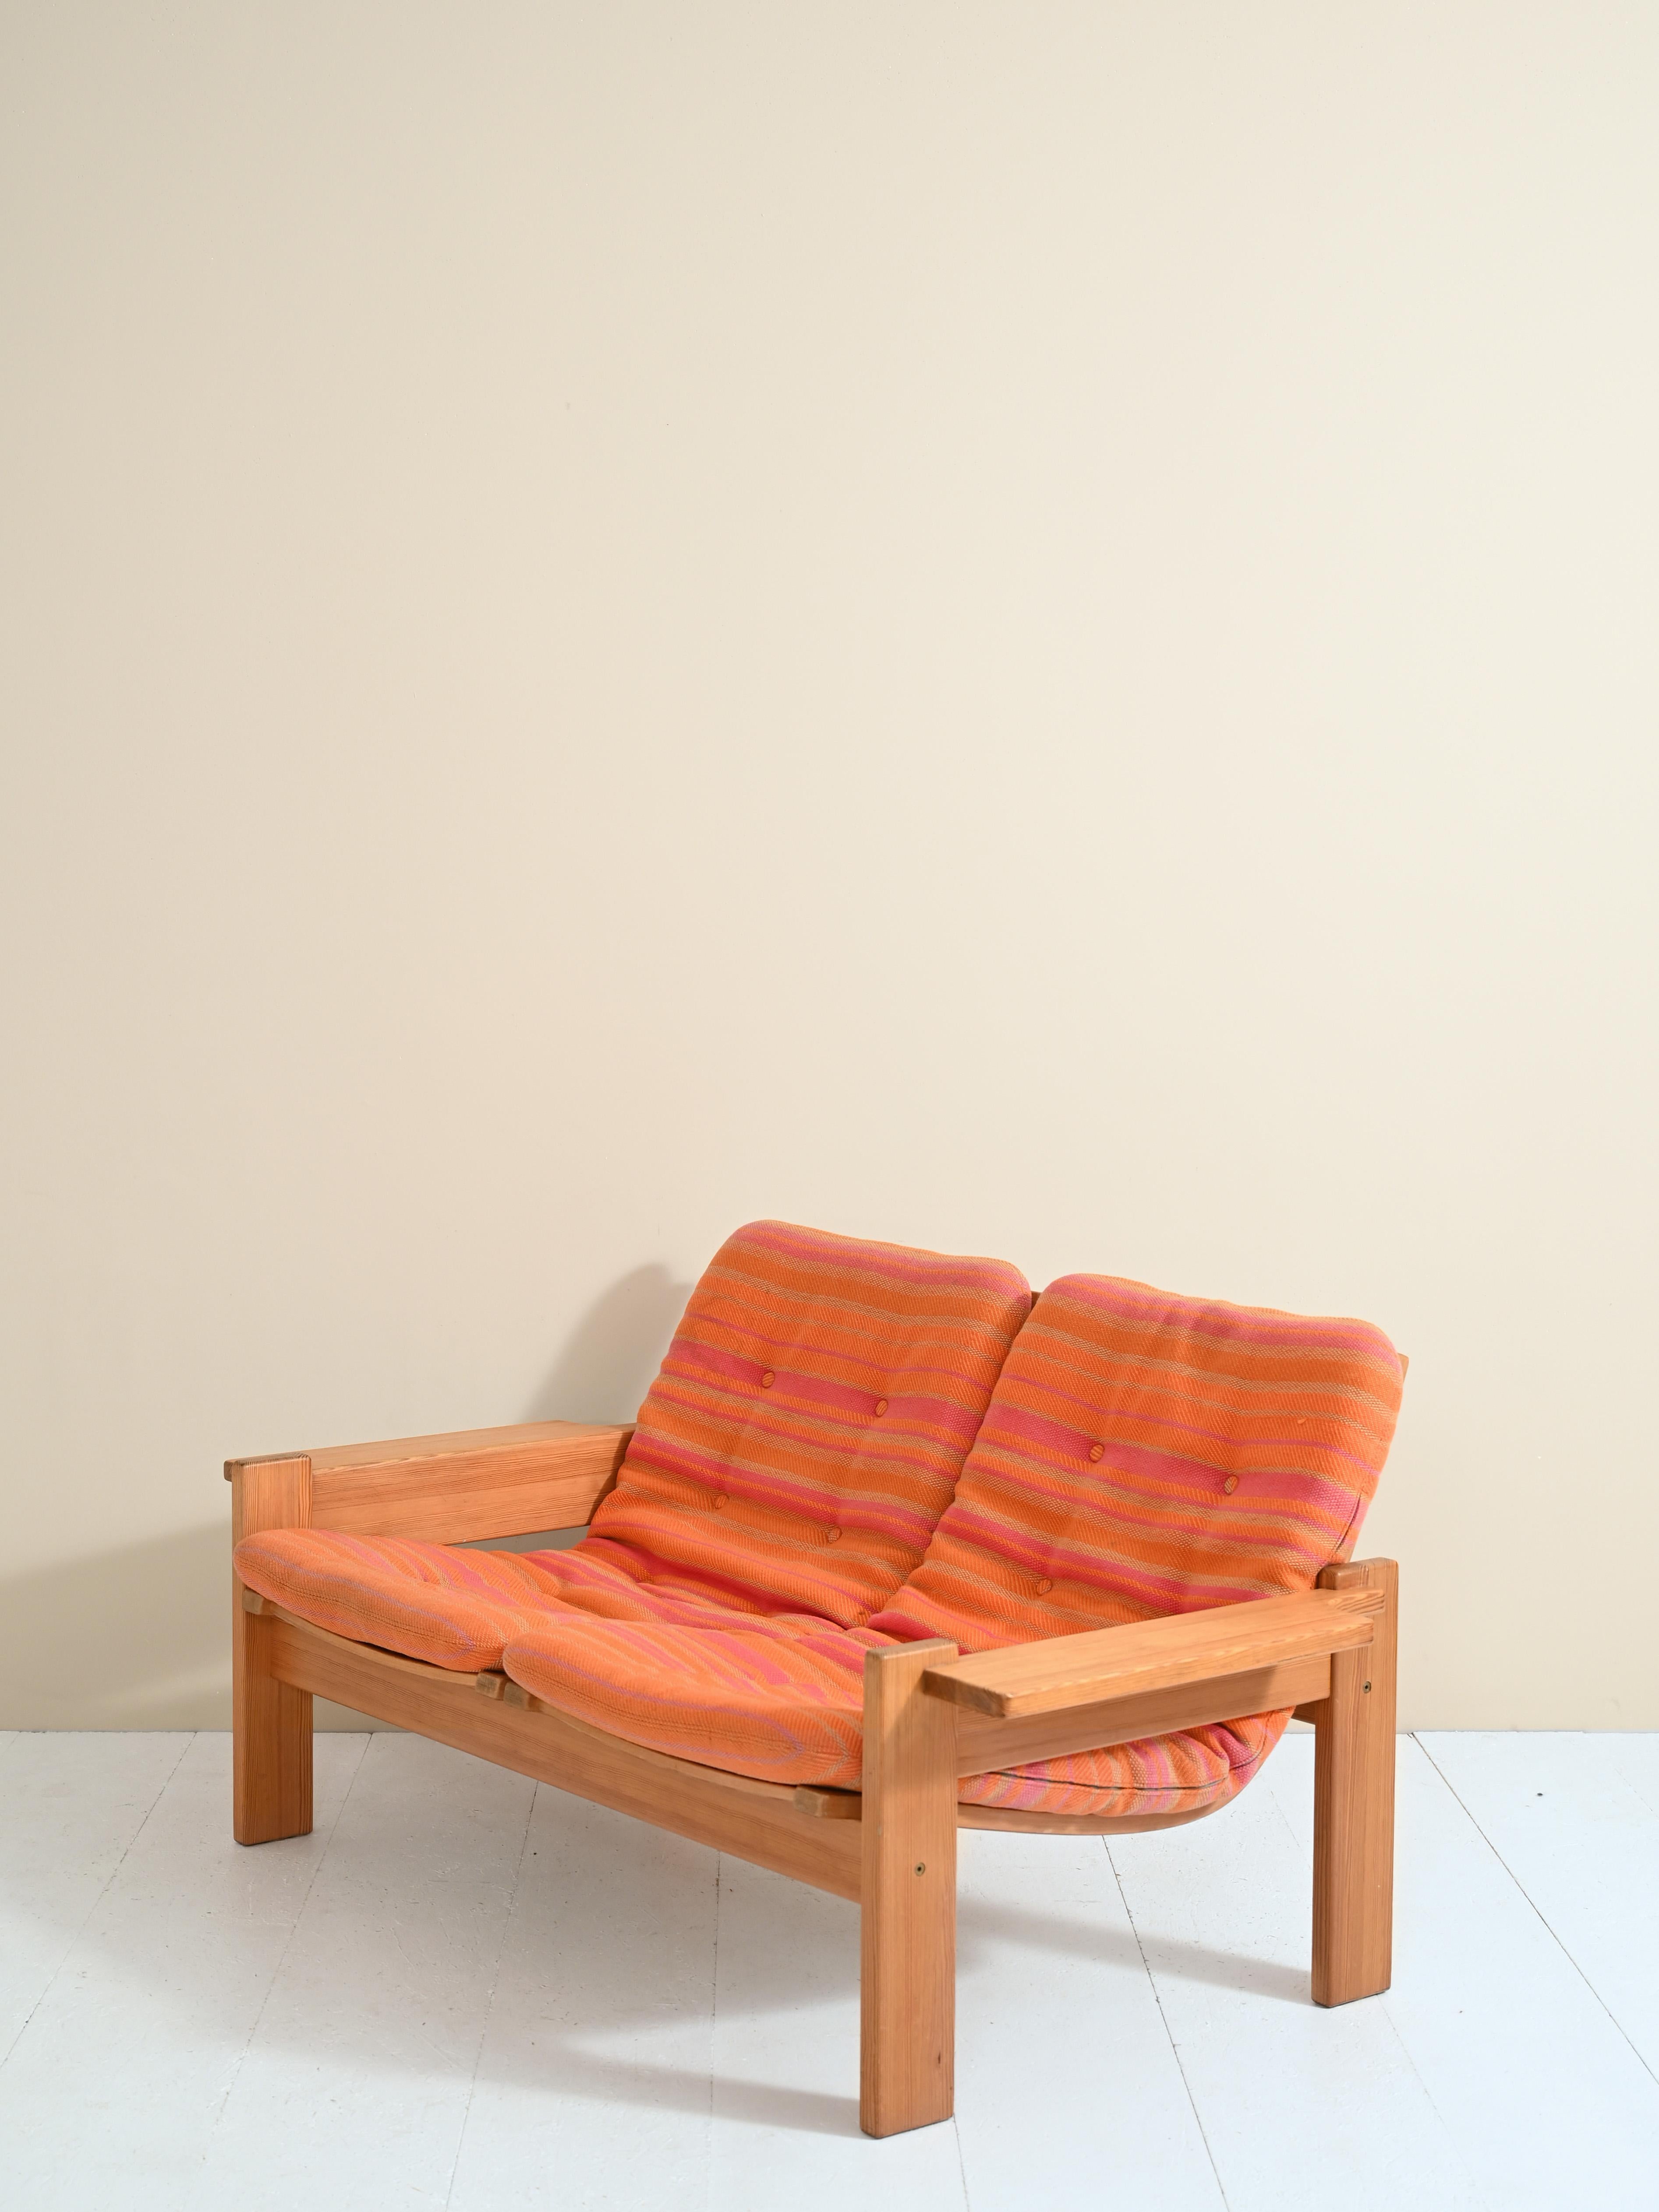 Two-seater sofa designed by Yngve Ekstom for Swedese in the 1970s.
The frame is made of light pine wood and the seat is made of fabric. The cushions are period originals and have removable covers.

AC080.